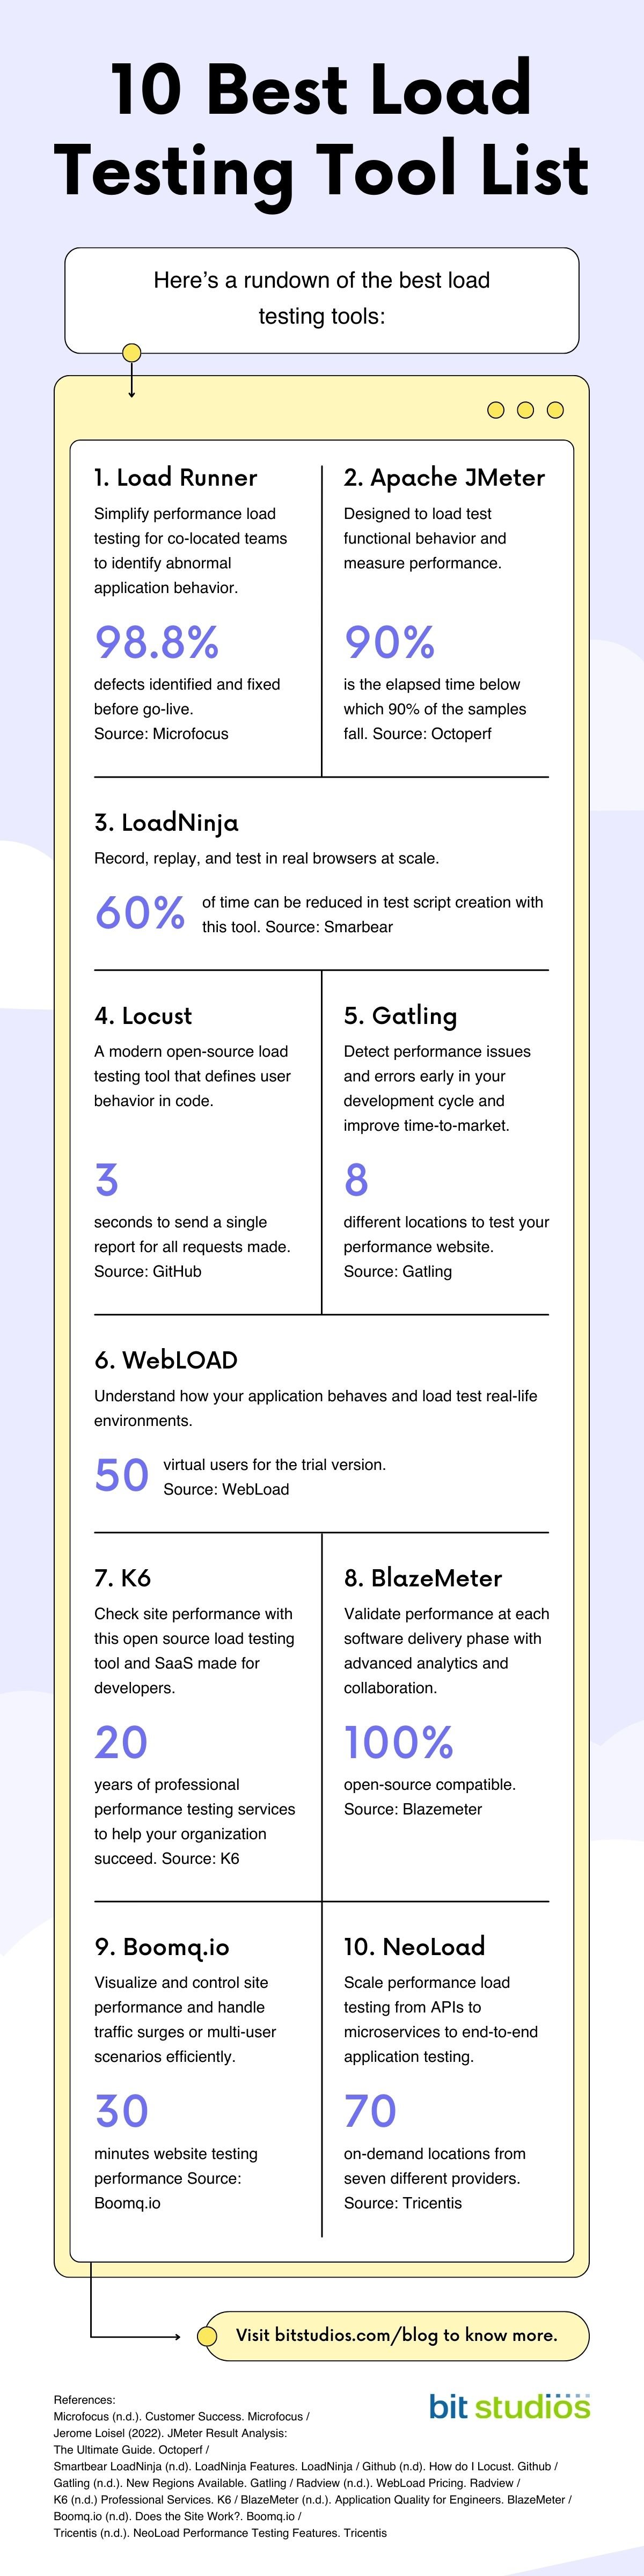 The Best Load Testing Tool List